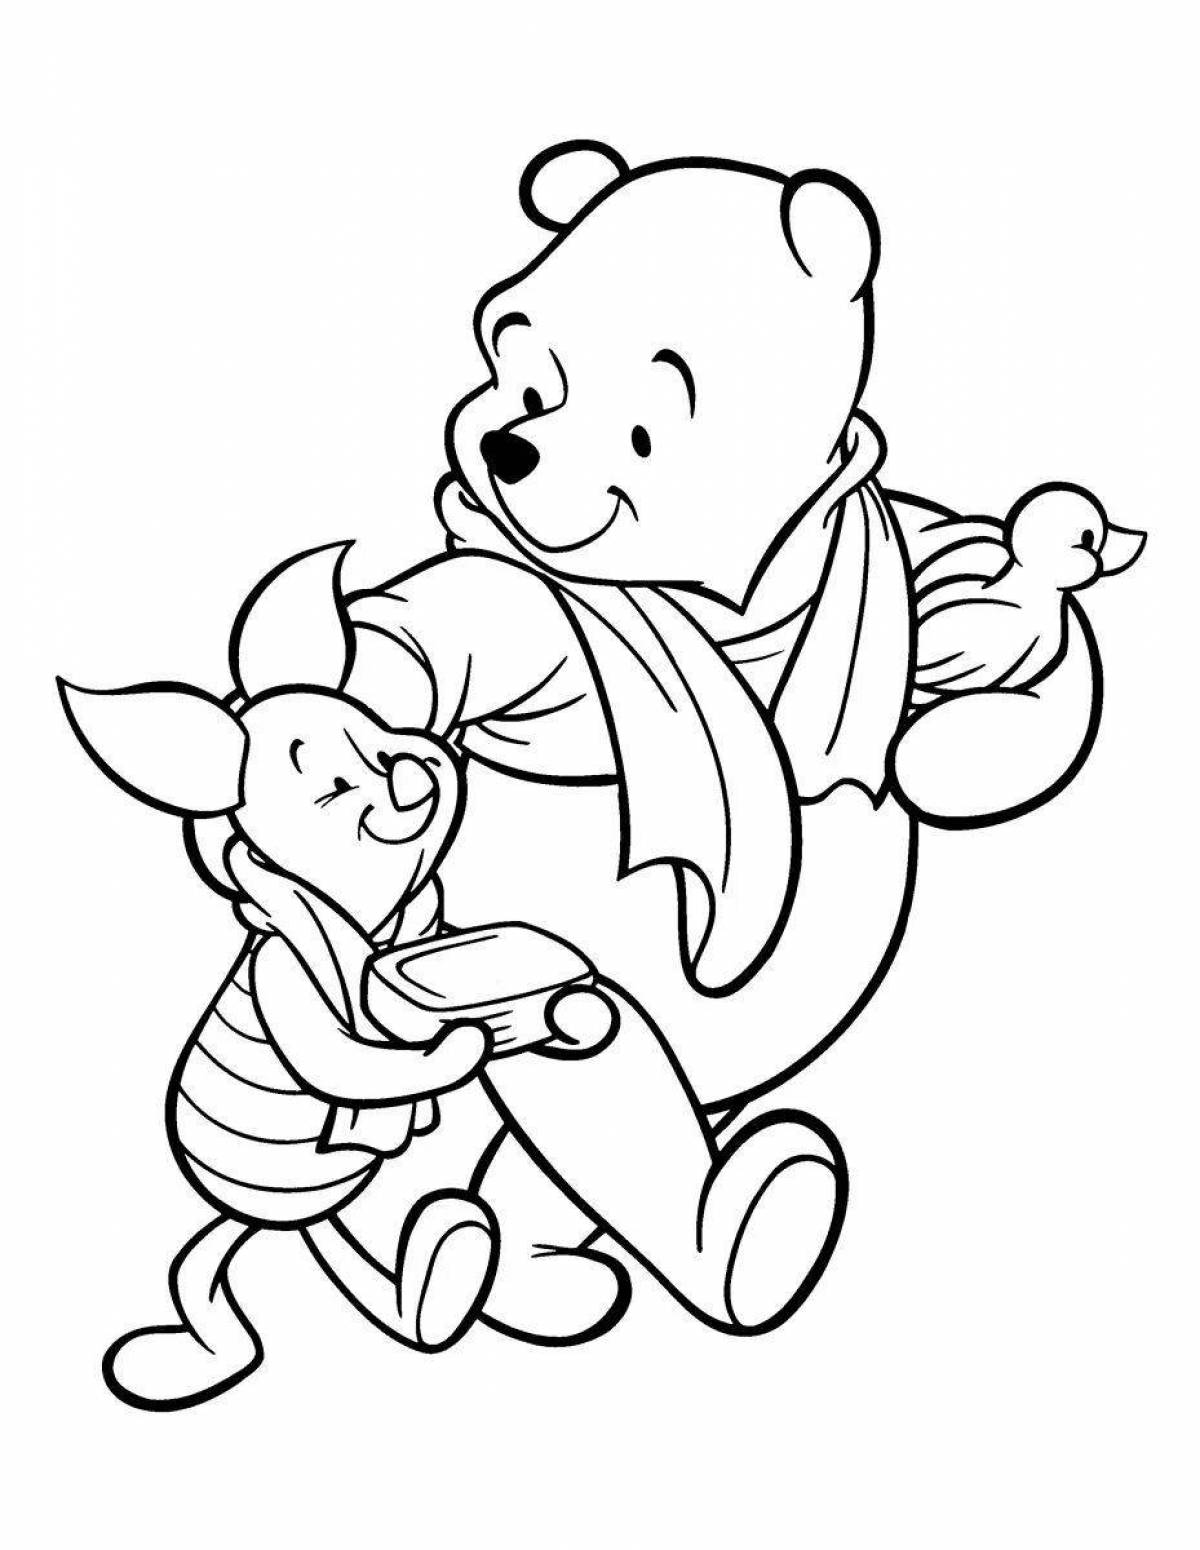 Coloring page dazzling winnie the pooh